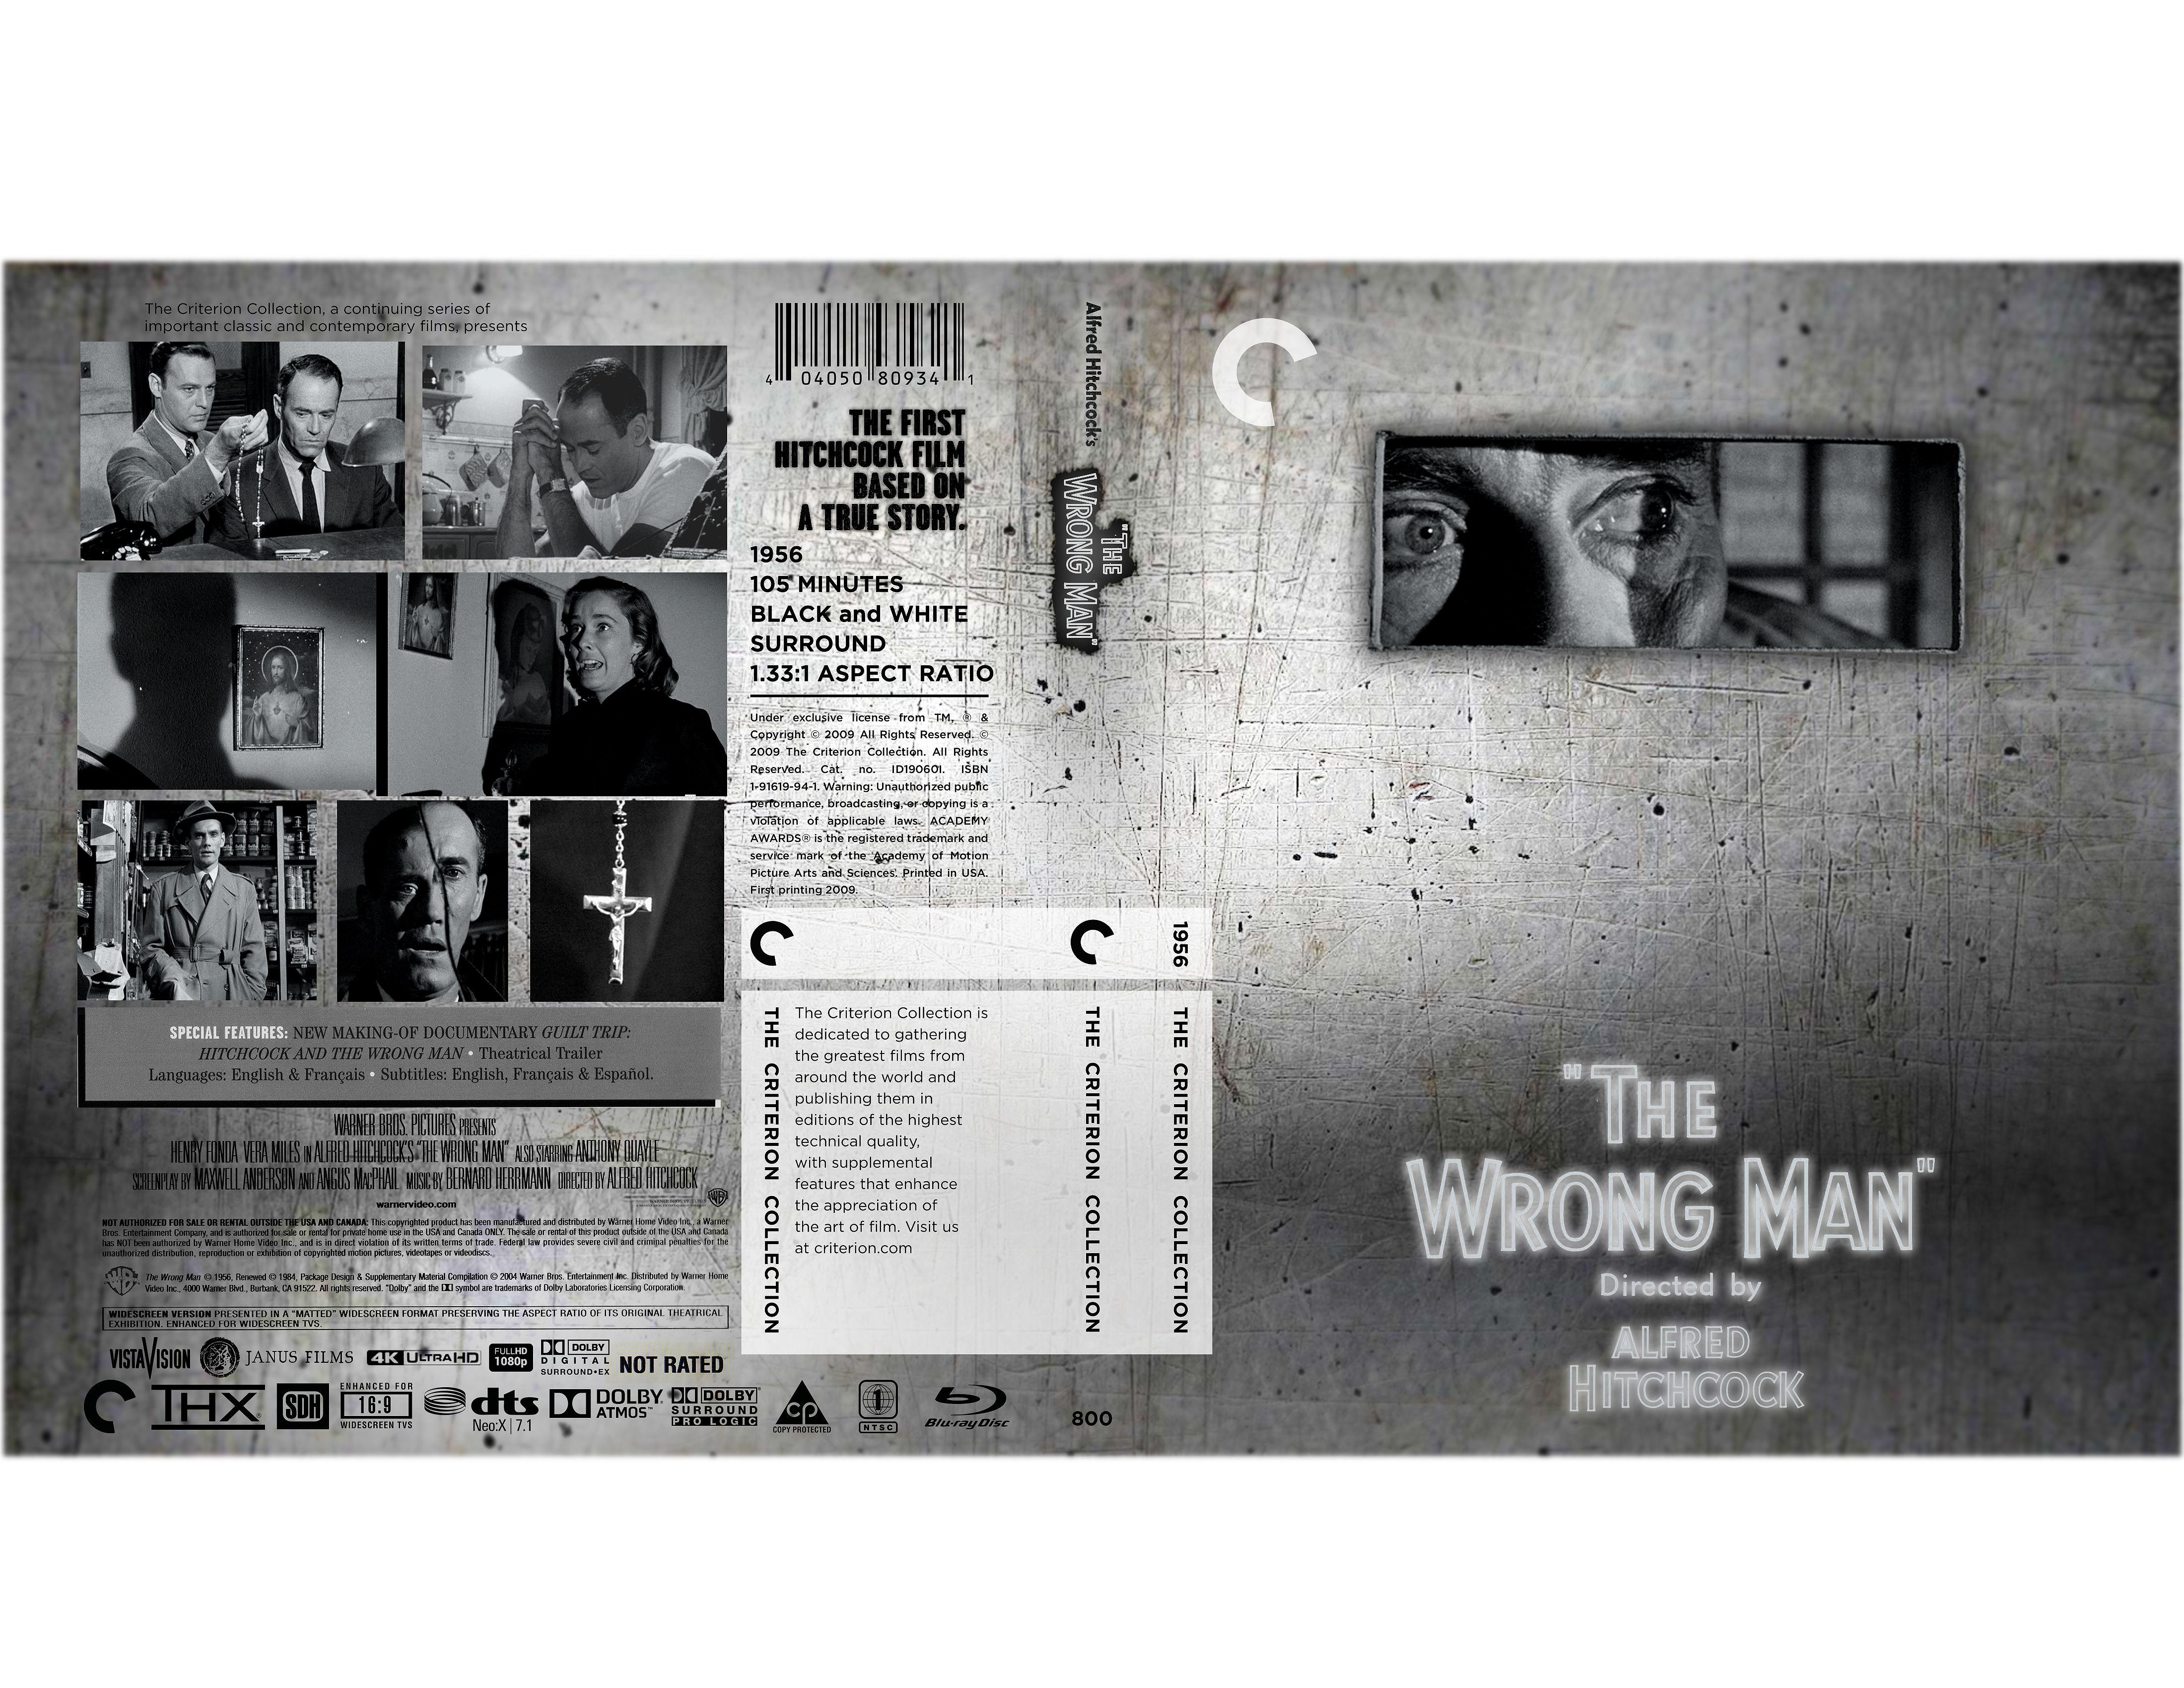 Wrong Man NEW Criterion BluRay Cover Printout.jpg